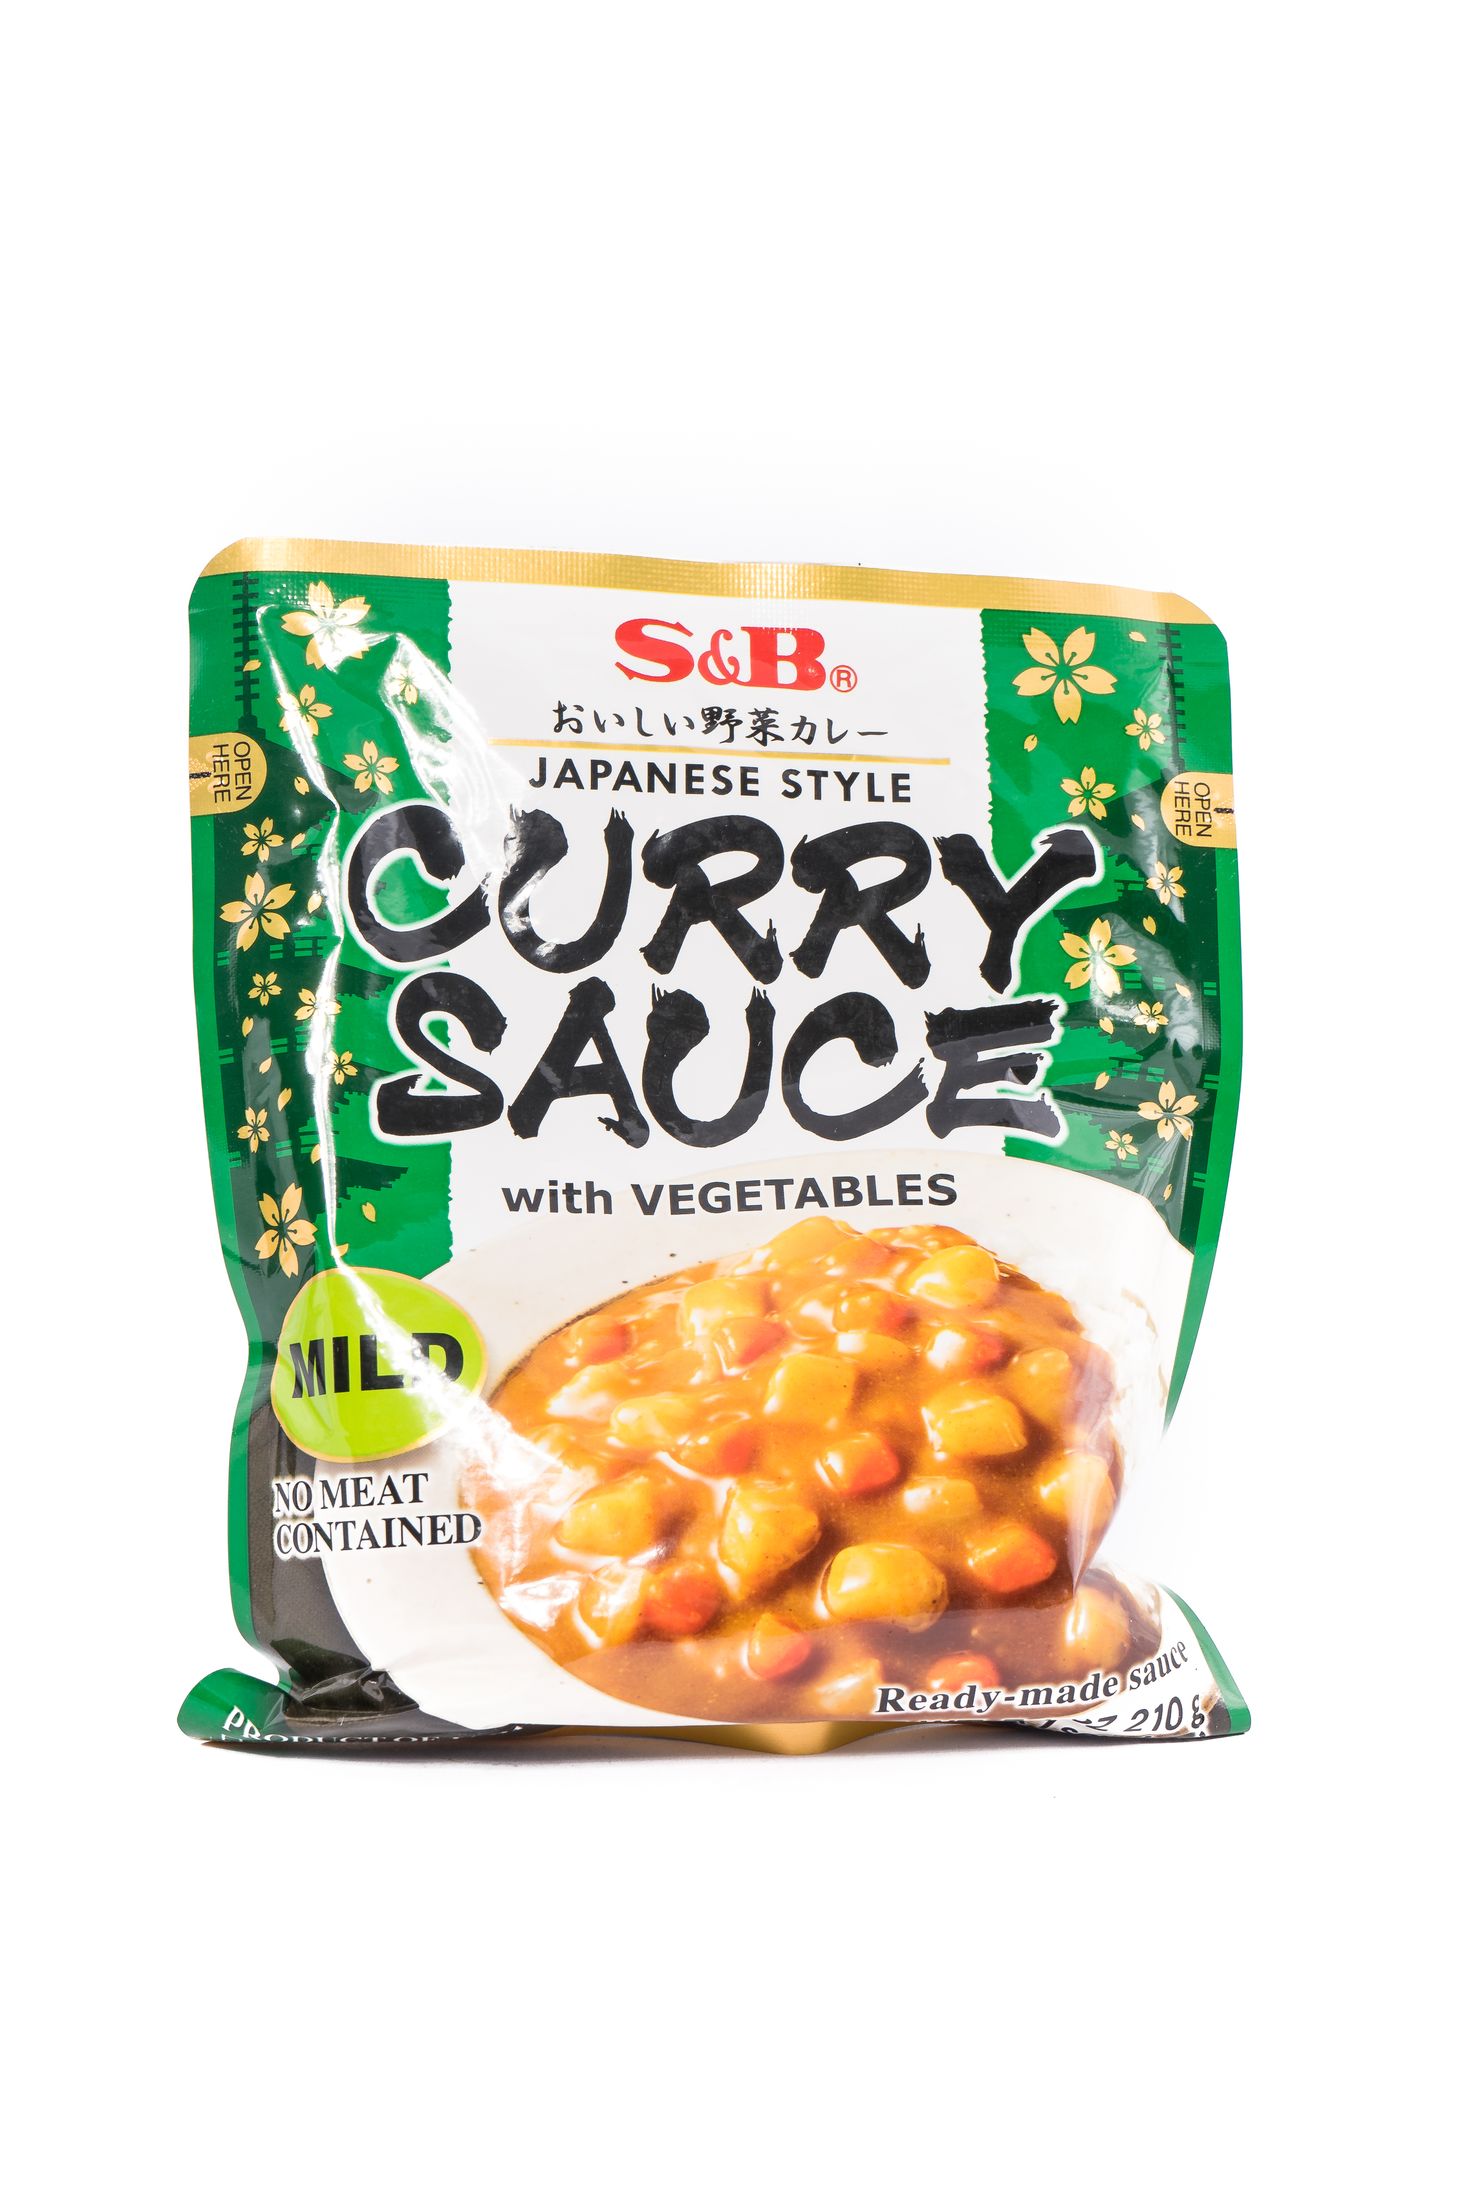 S&B Japanese curry sauce with vegetables (mild)